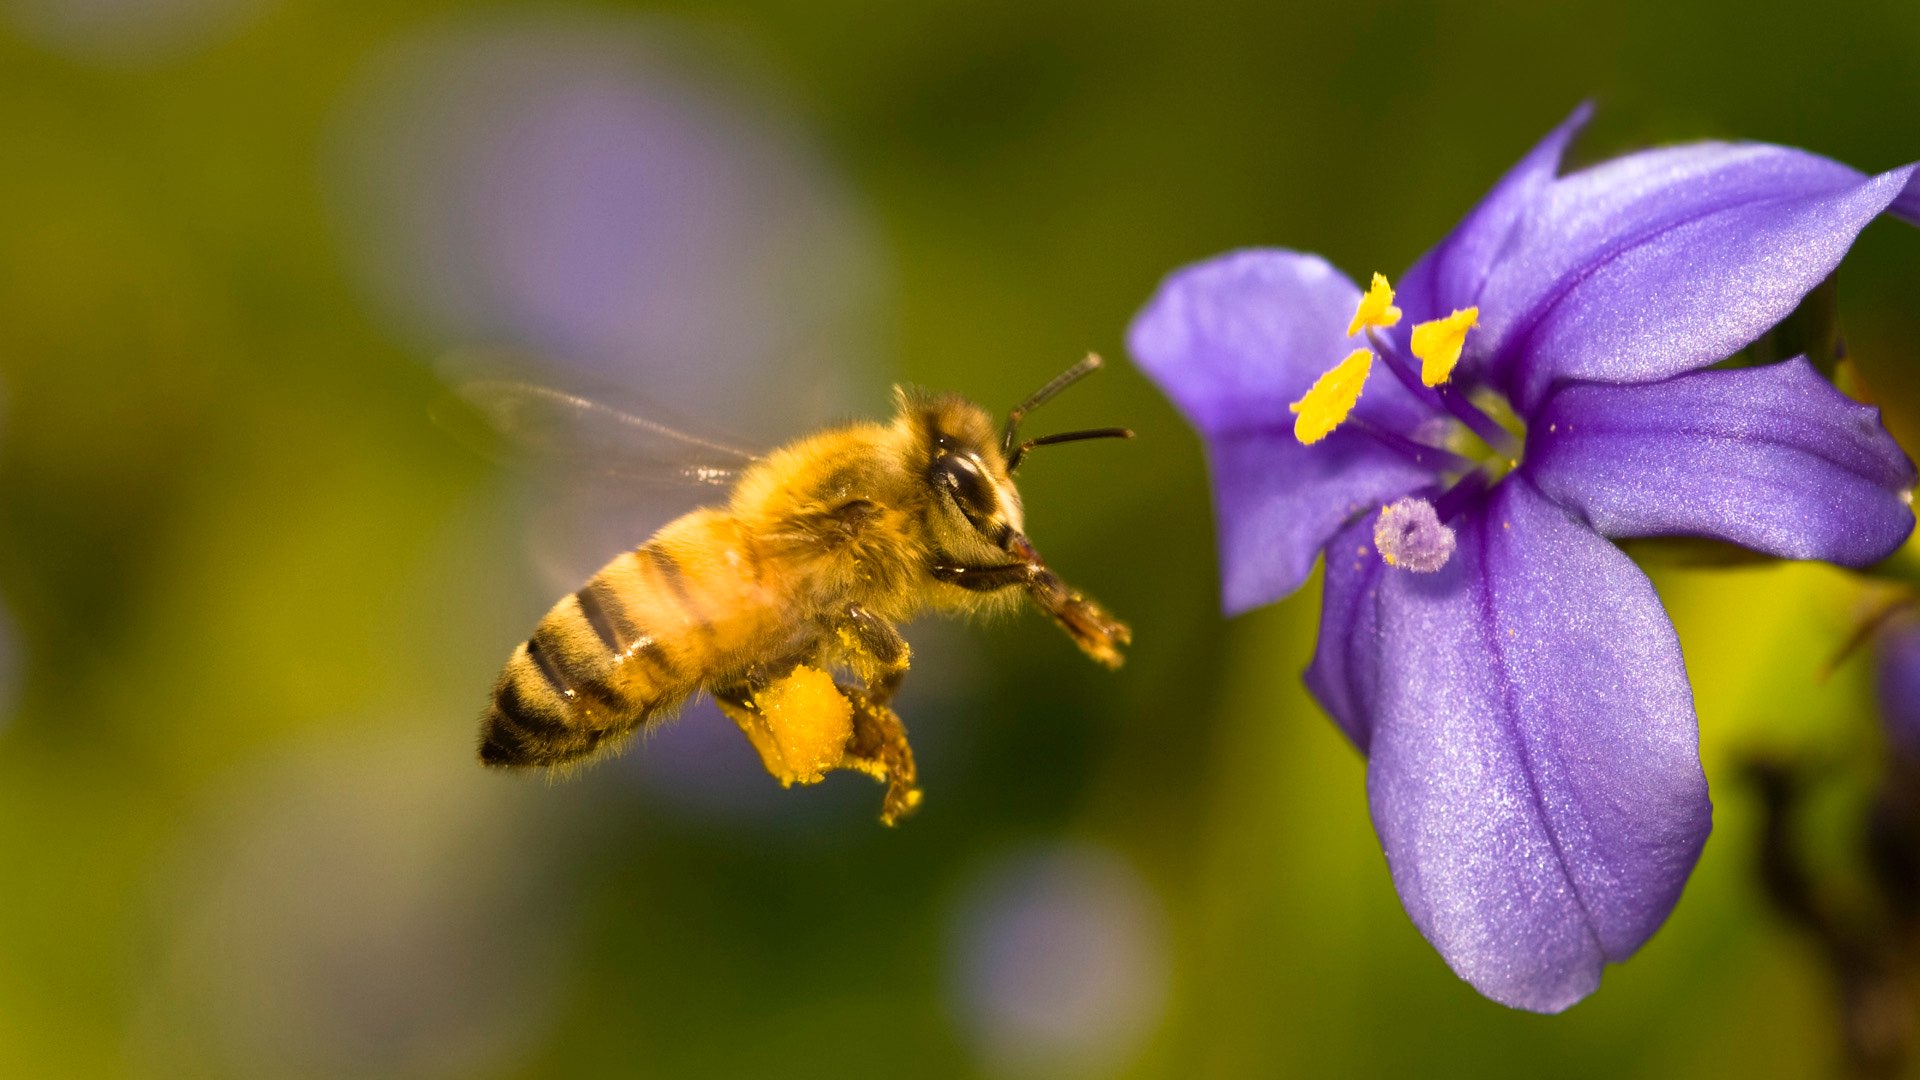 Honey bee hovering near a flower